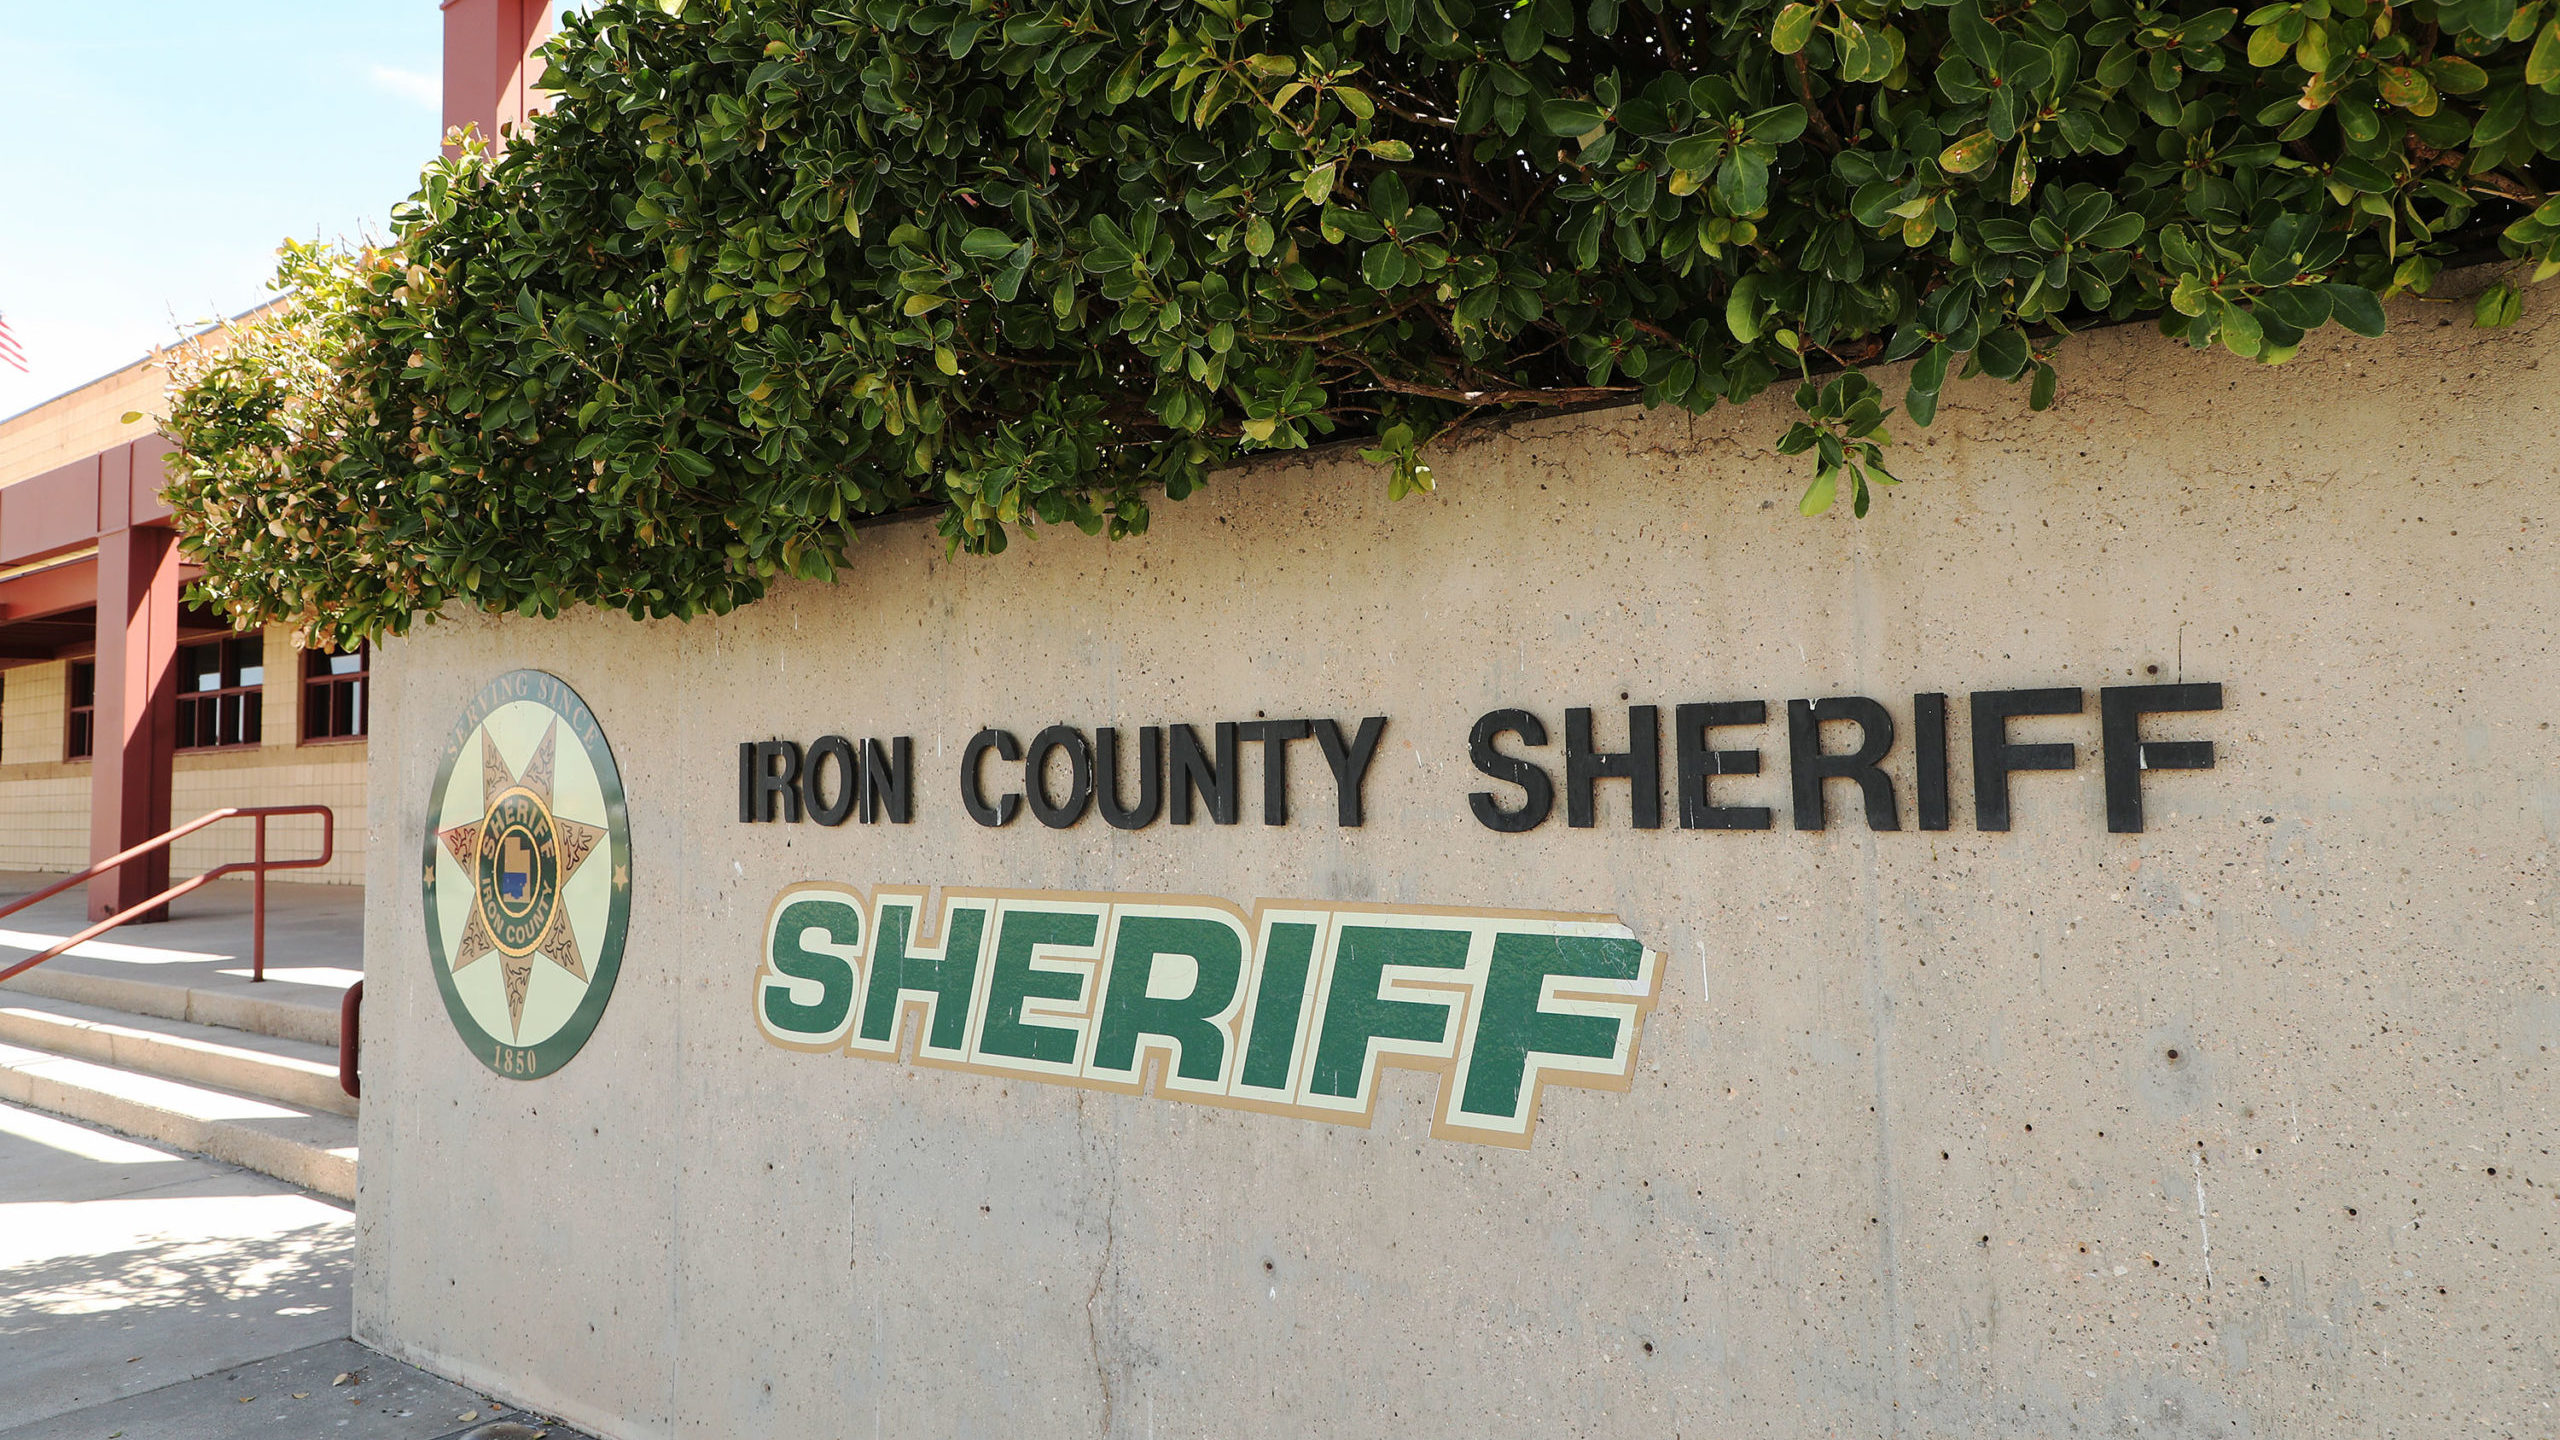 Iron County Sheriff's Office in Cedar City is pictured on Wednesday April 7, 2021.
Photo credit: Je...